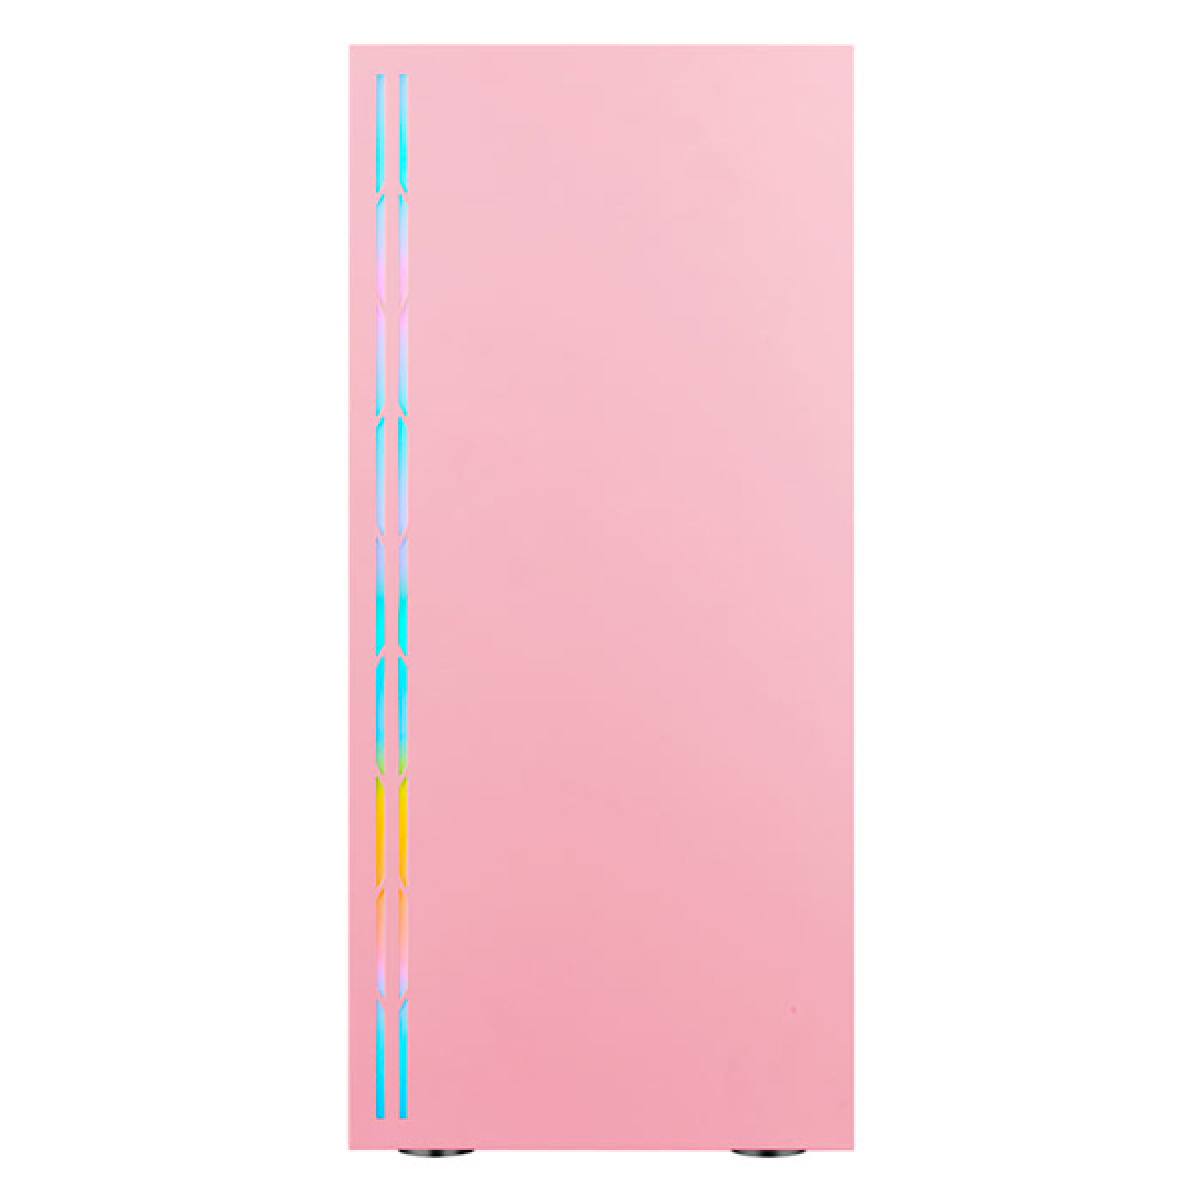 Case Golden Field RGB1-FORESEE - Pink